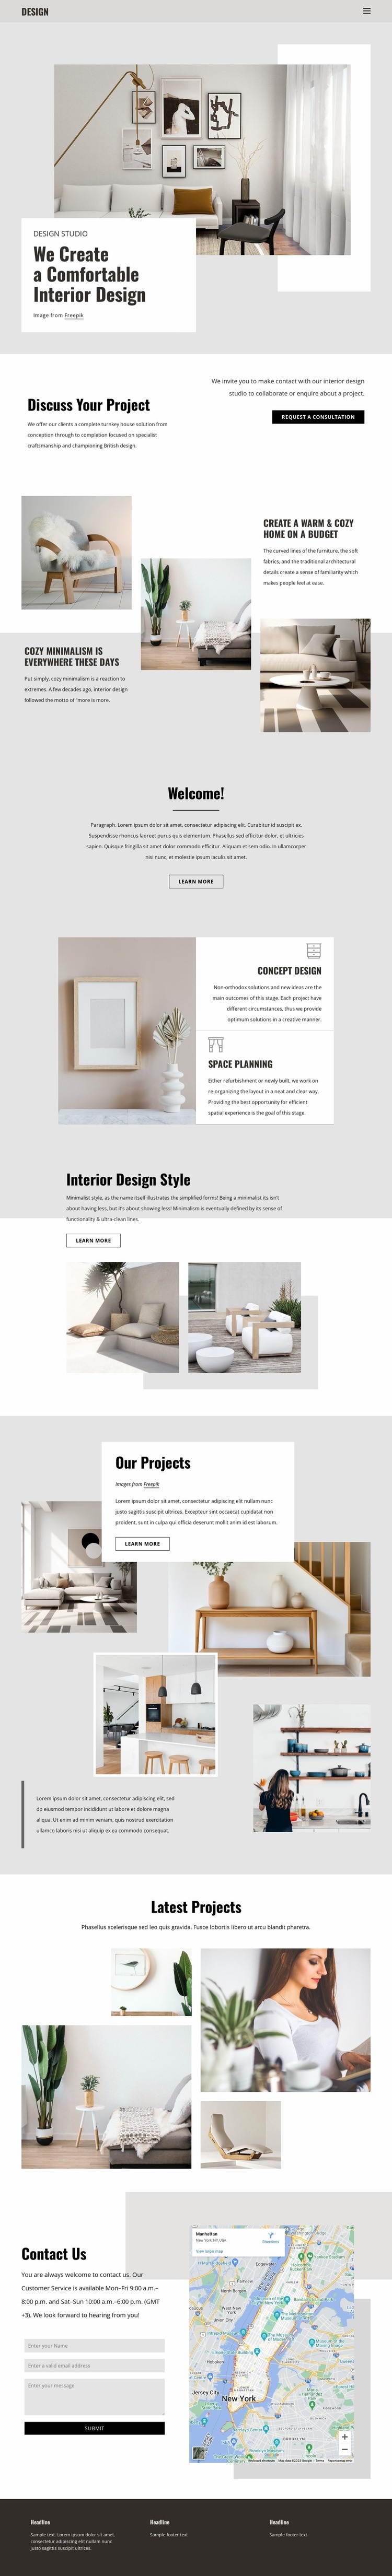 Designing Spaces and building dreams Html Code Example